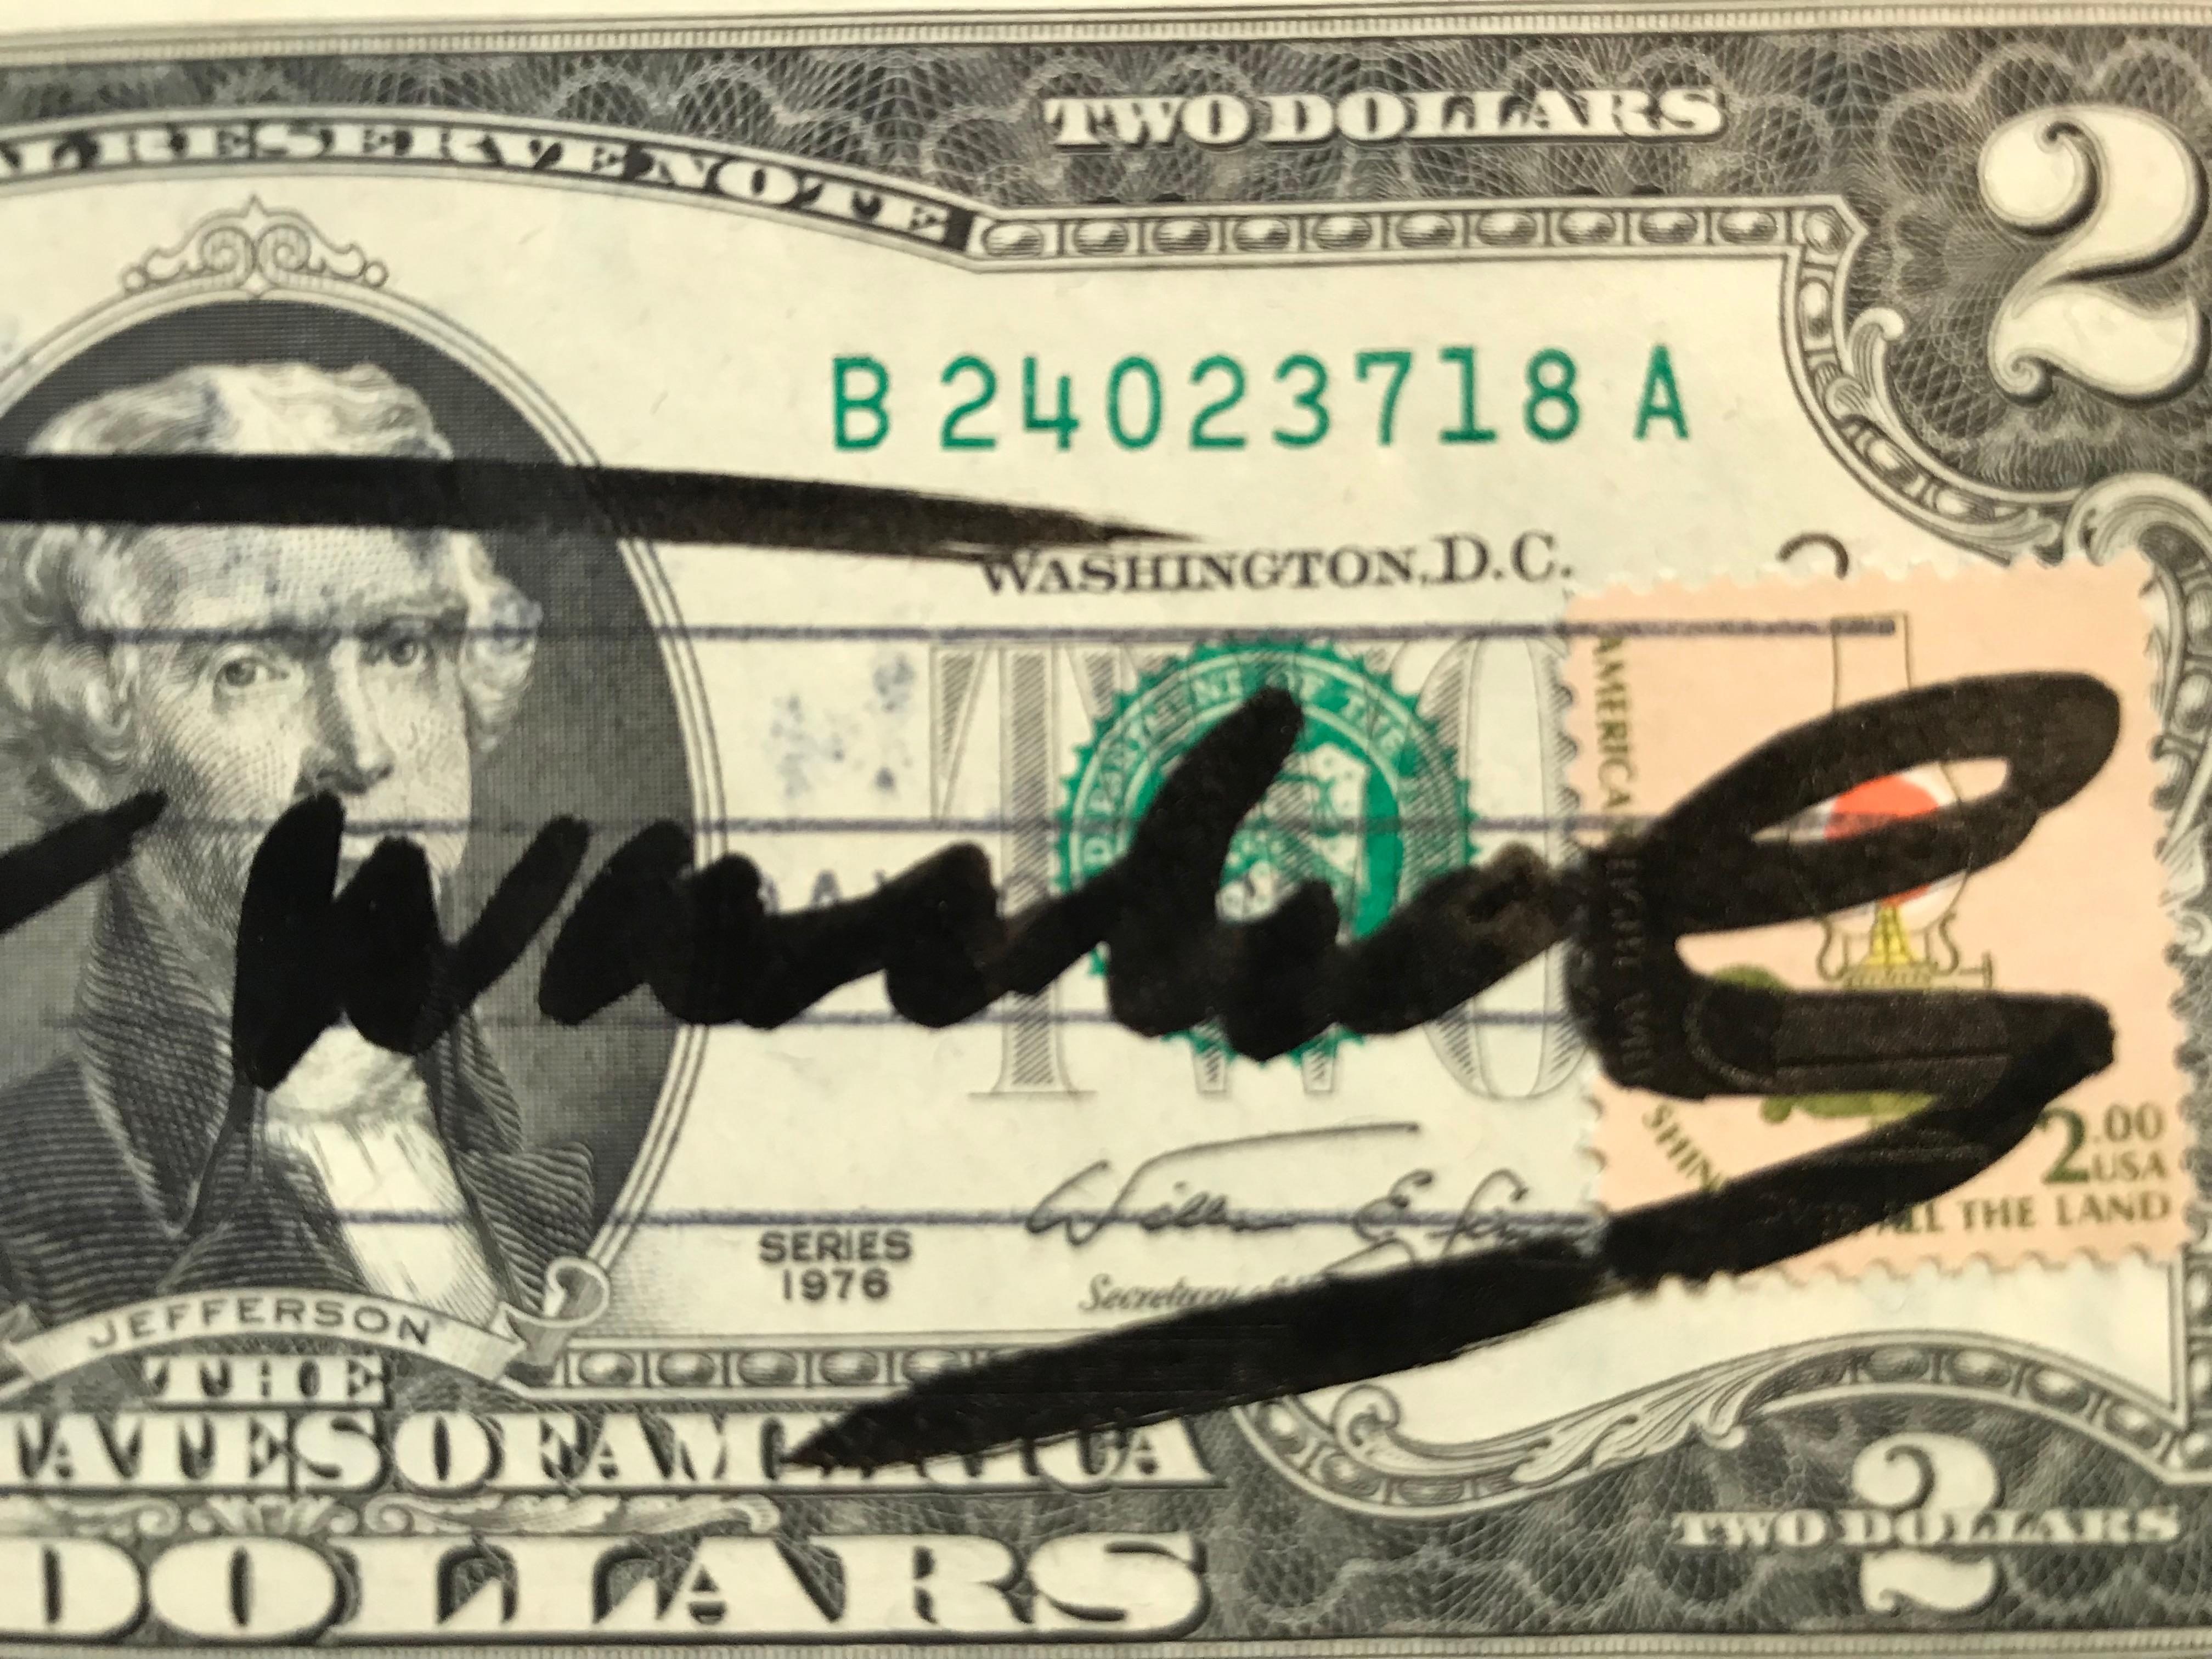 Andy warhol hand signed 2 USD dollar . 1976 - Contemporary Mixed Media Art by Andy Warhol